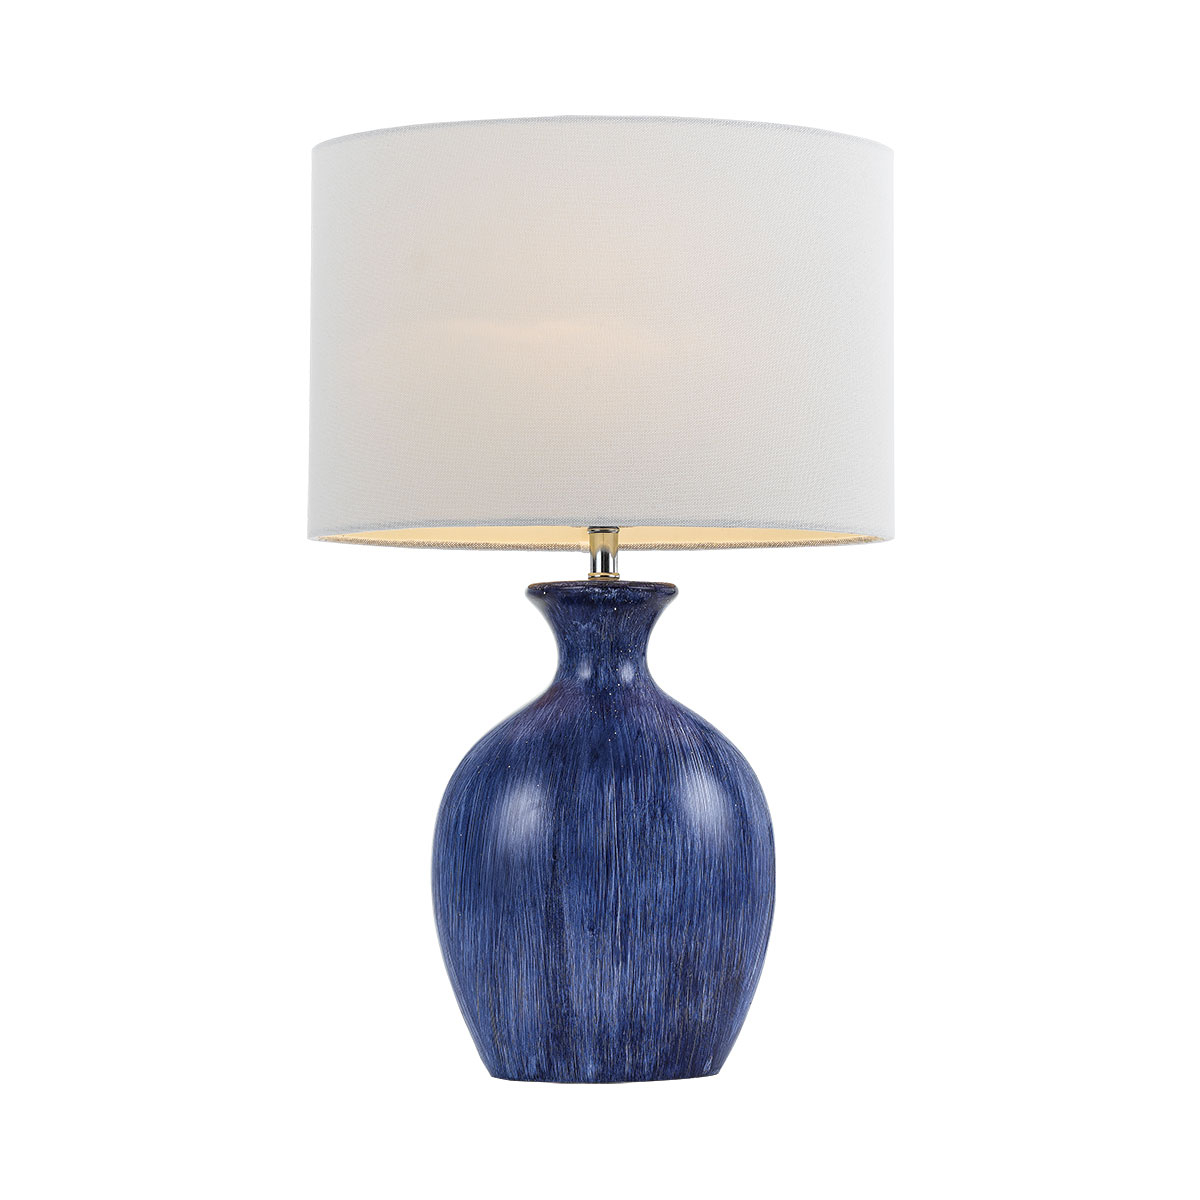 Panto 1 Light Ceamic Table Lamp Blue White Panto Tl Blwwh pertaining to proportions 1200 X 1200